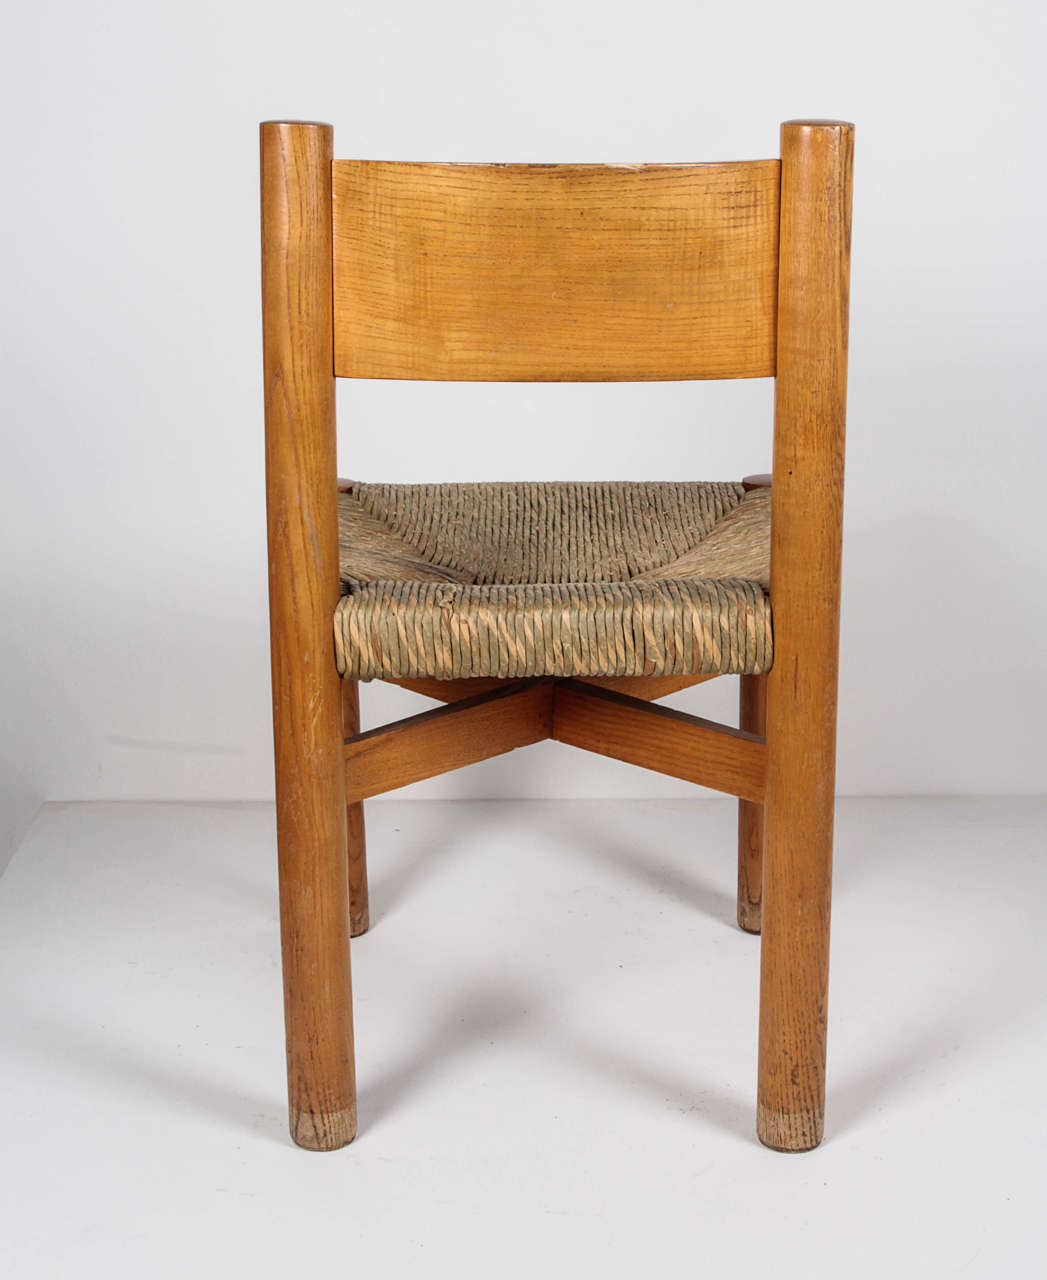 French Charlotte Perriand Chair, circa 1967